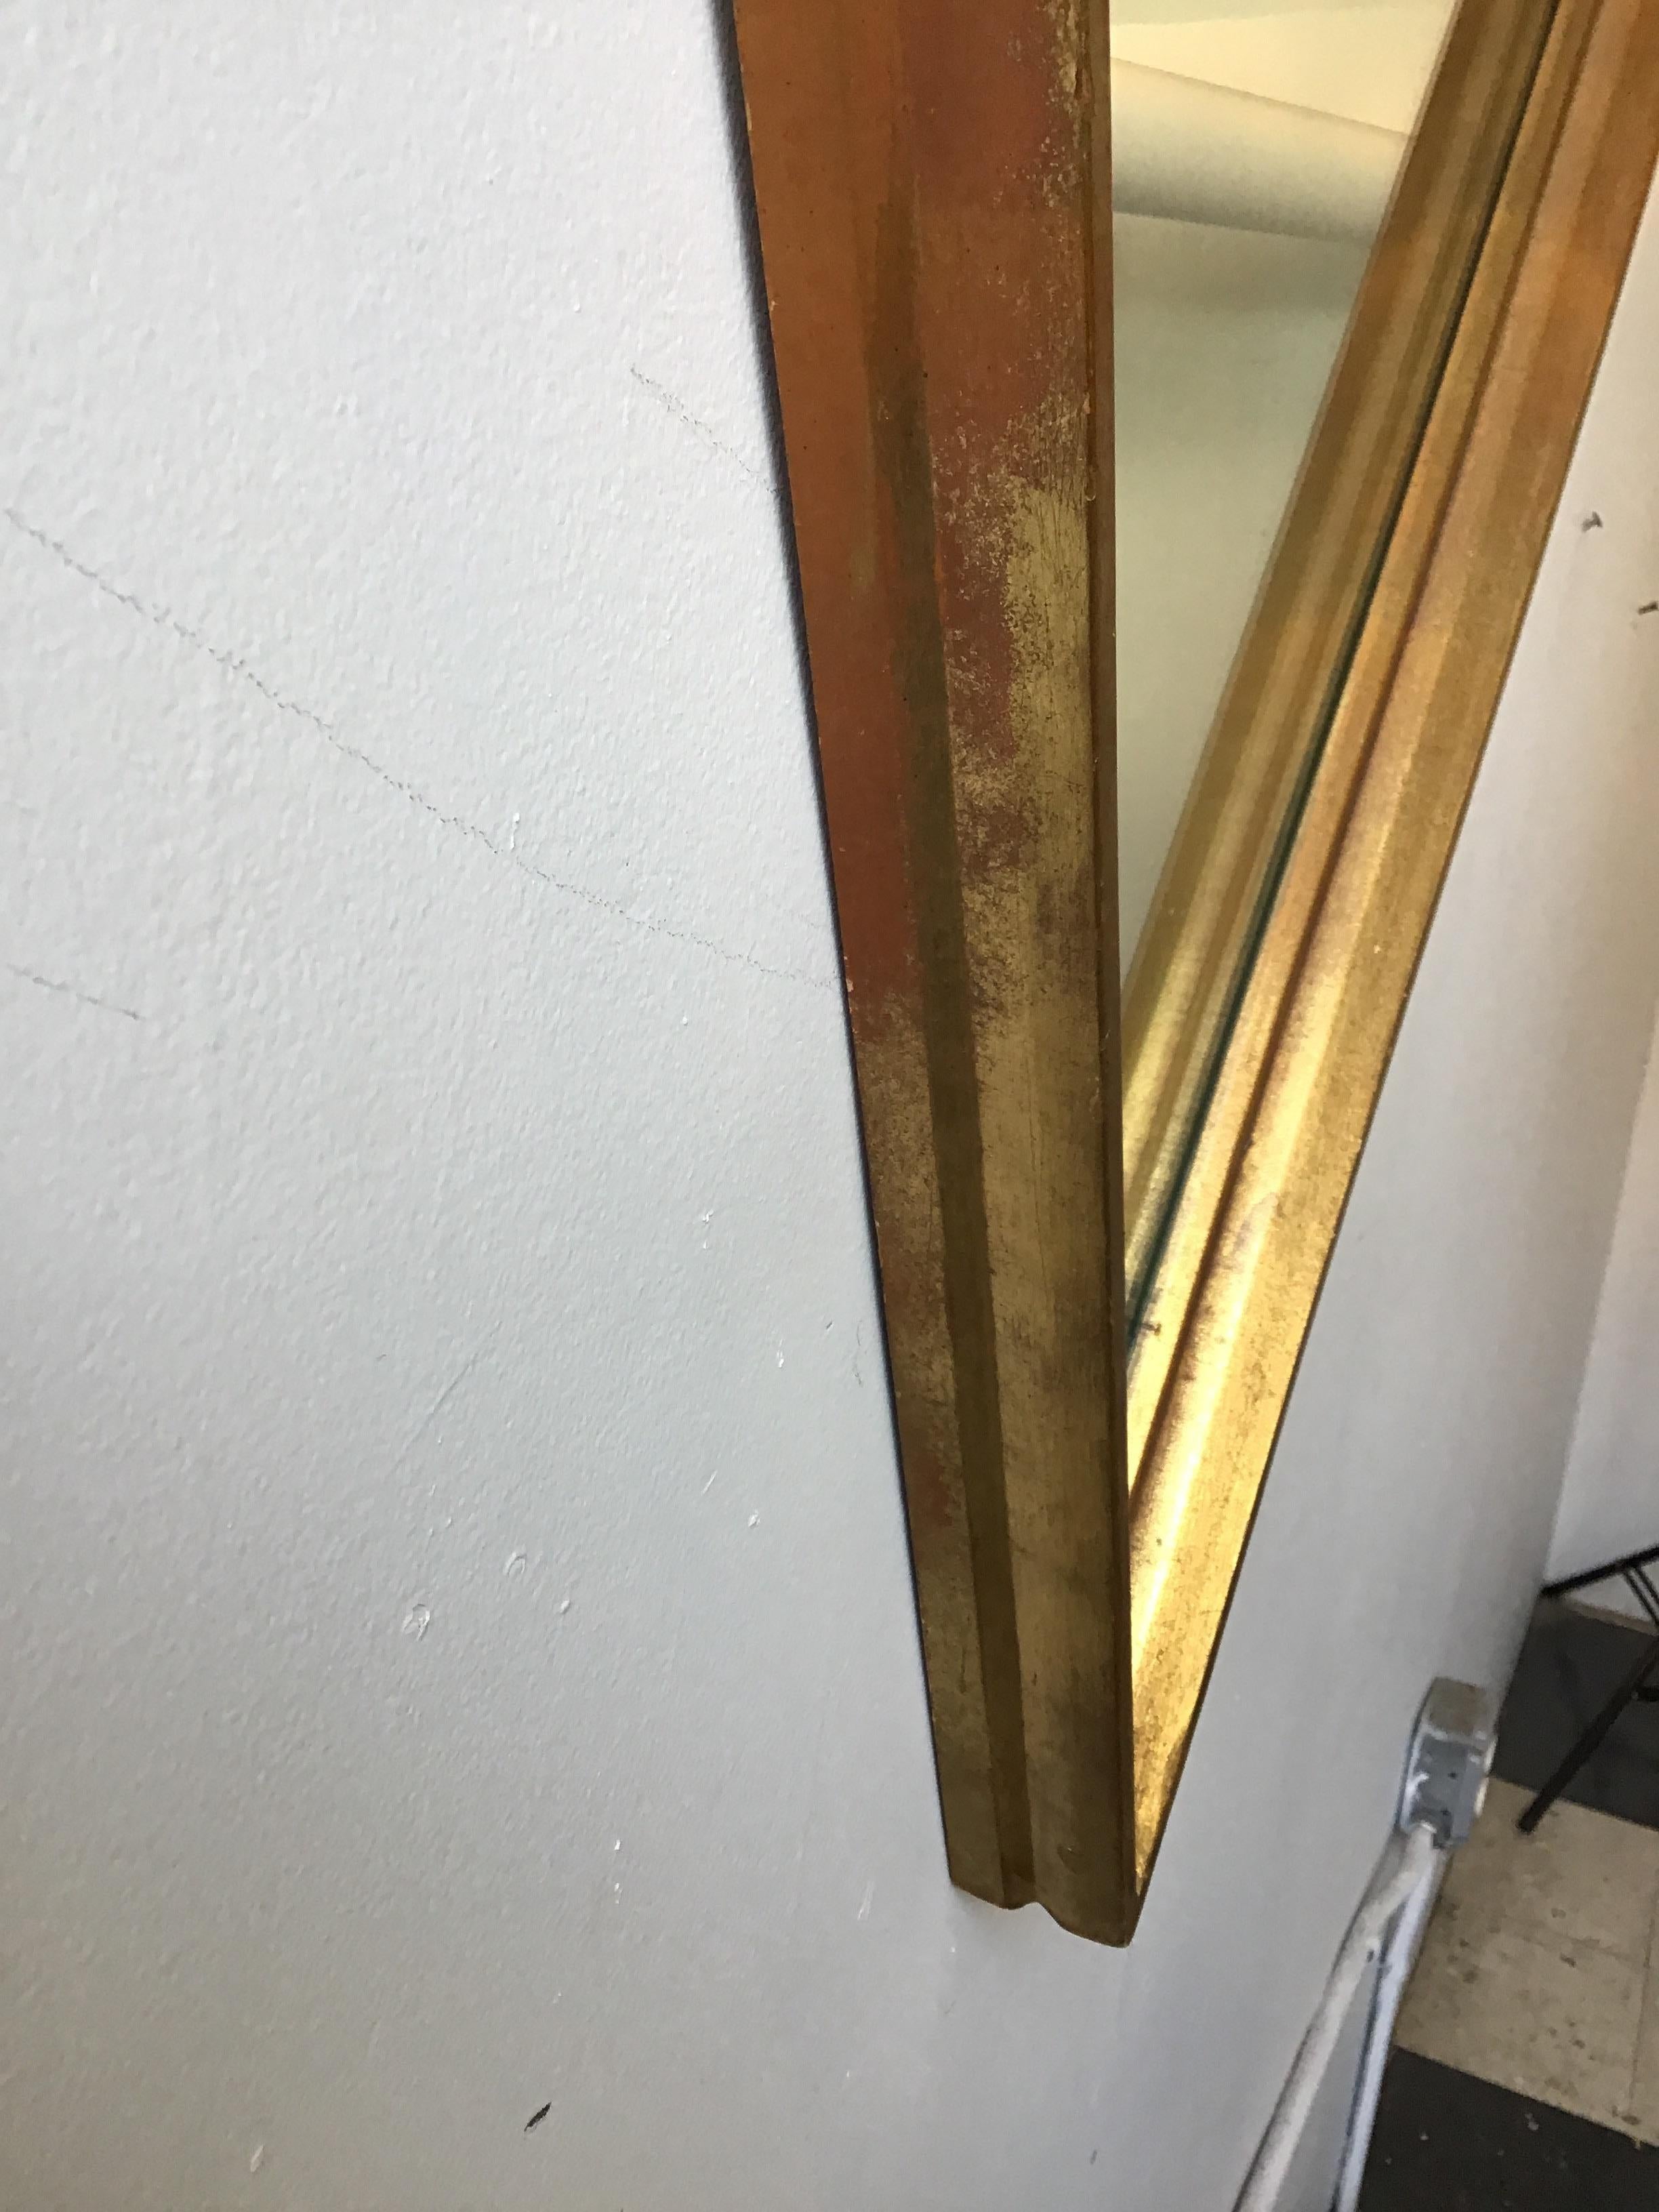 1960s giltwood diamond shaped mirror.
This item can be shipped UPS.